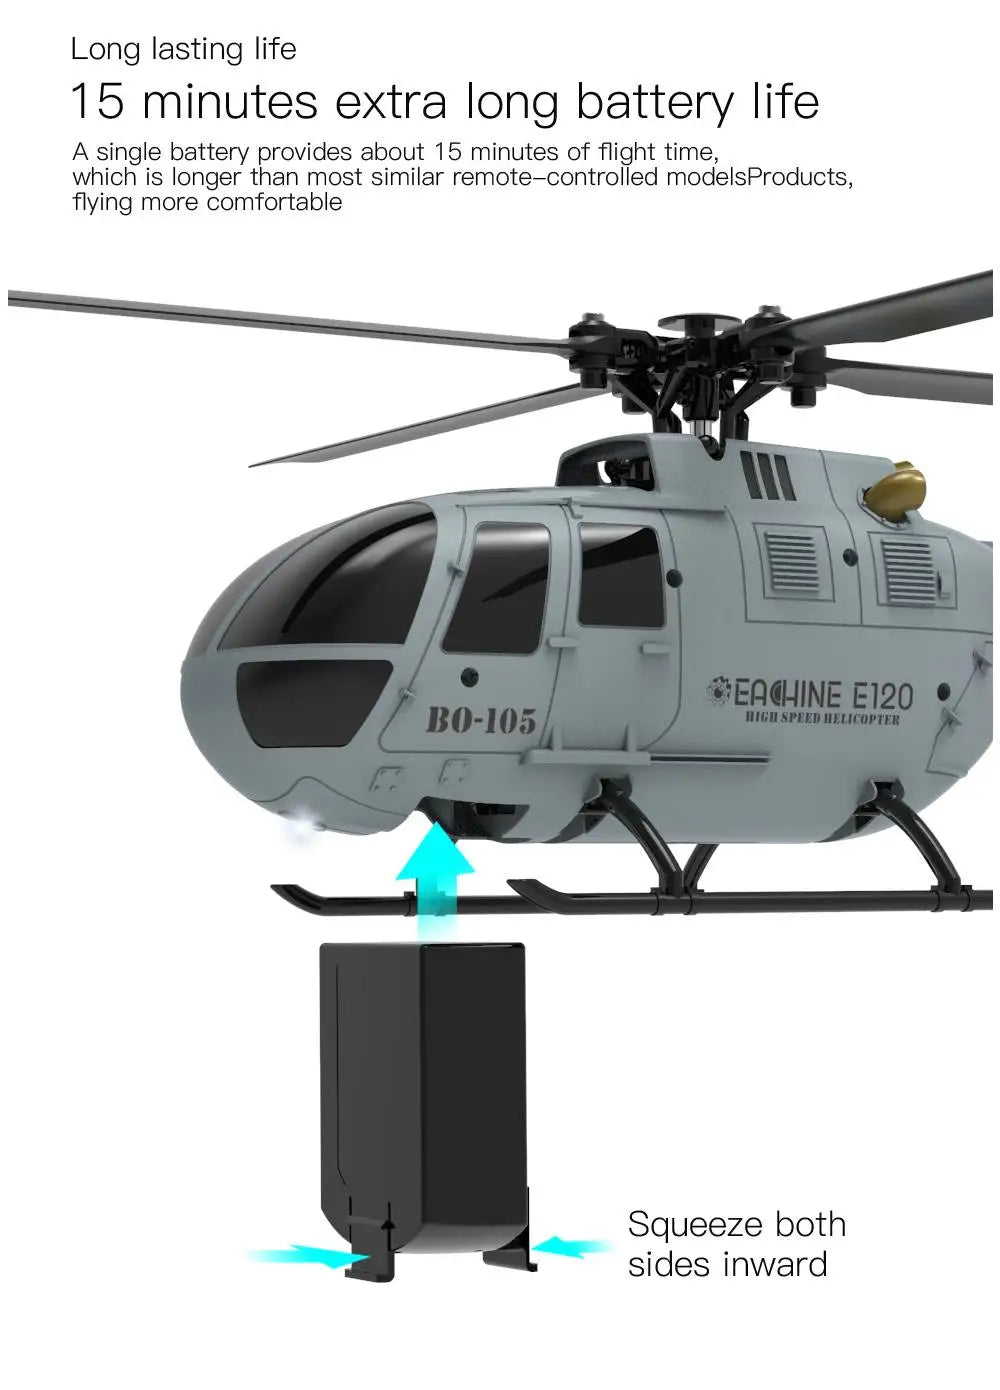 Eachine E120 RC Helicopter, long lasting life 15 minutes extra long battery life single battery provides about 15 minutes of flight time which